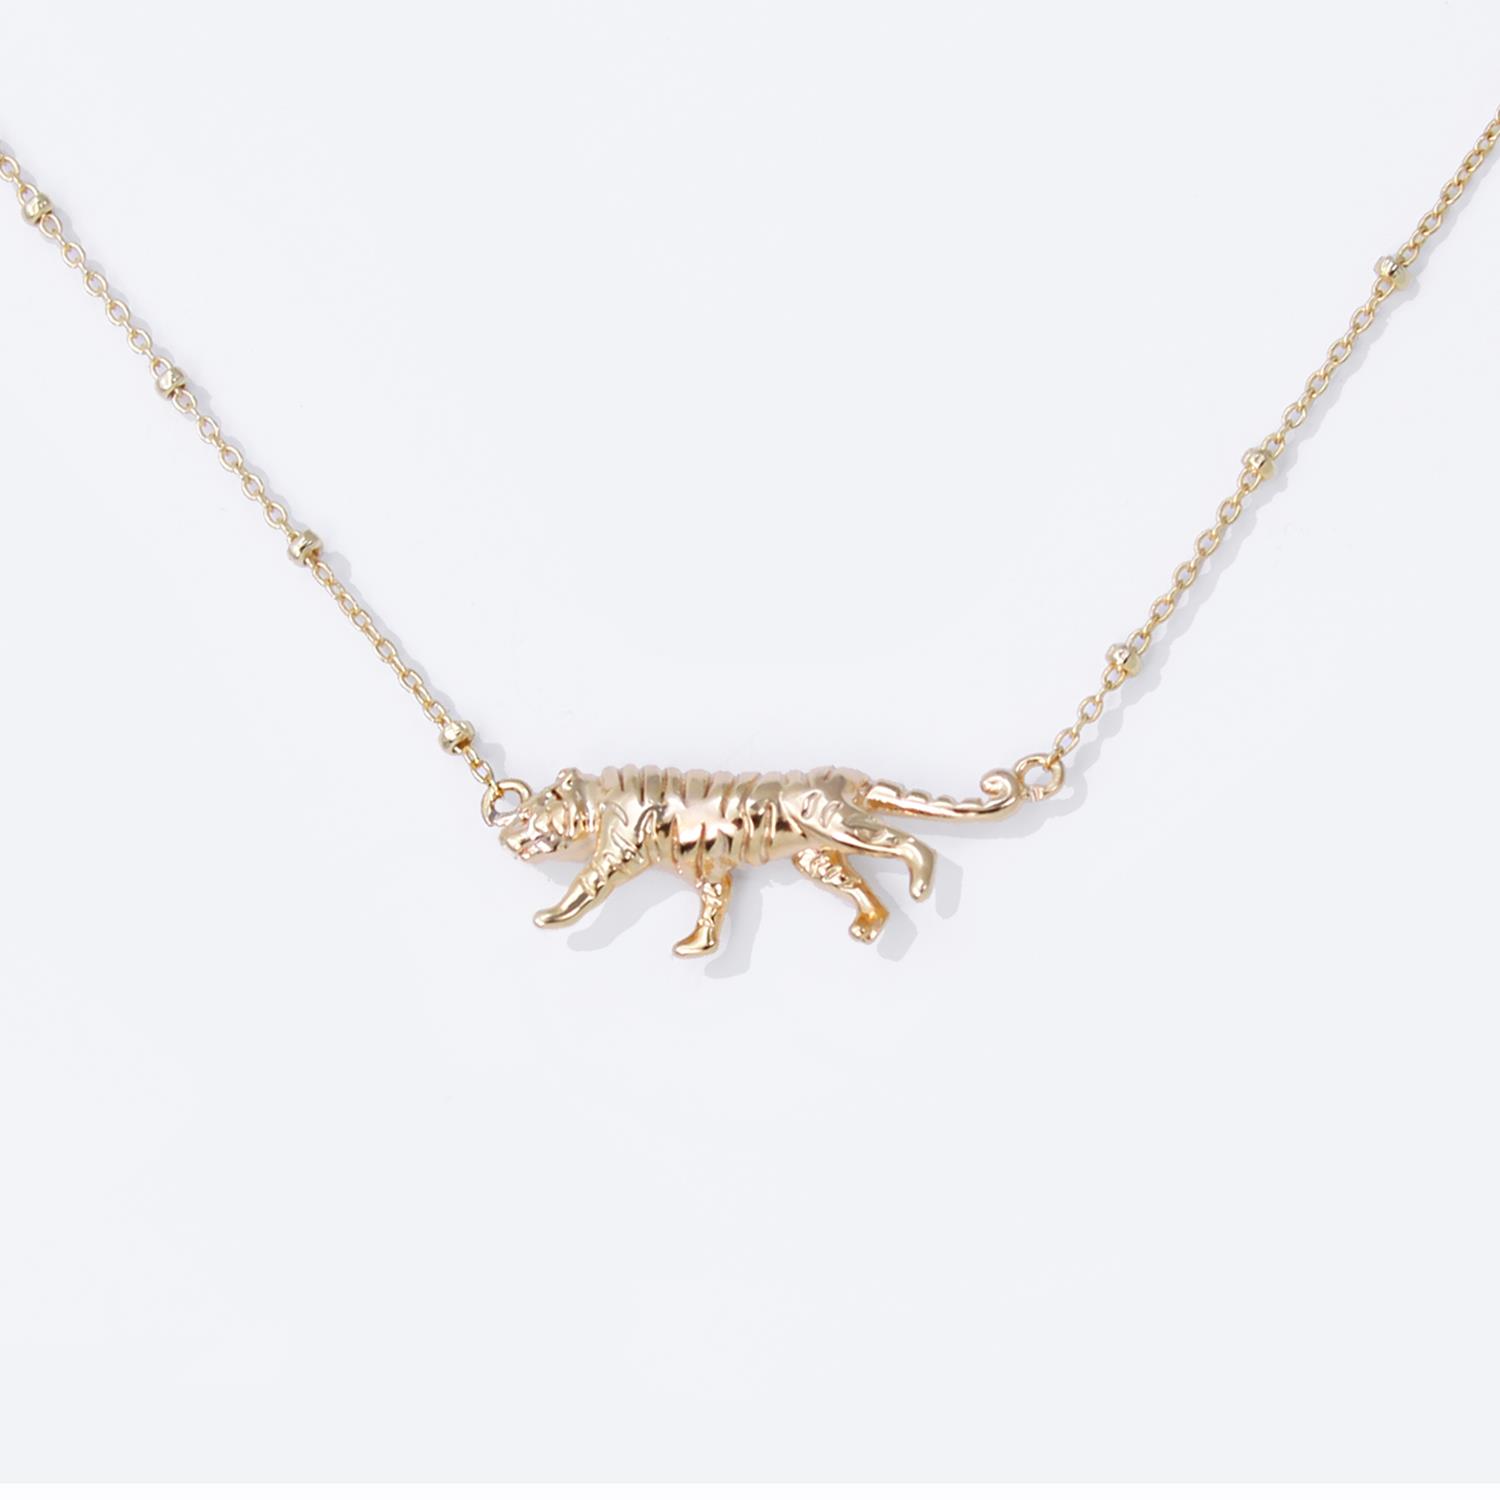 18K GOLD RHODIUM DIPPED CONFIDENT NECKLACE